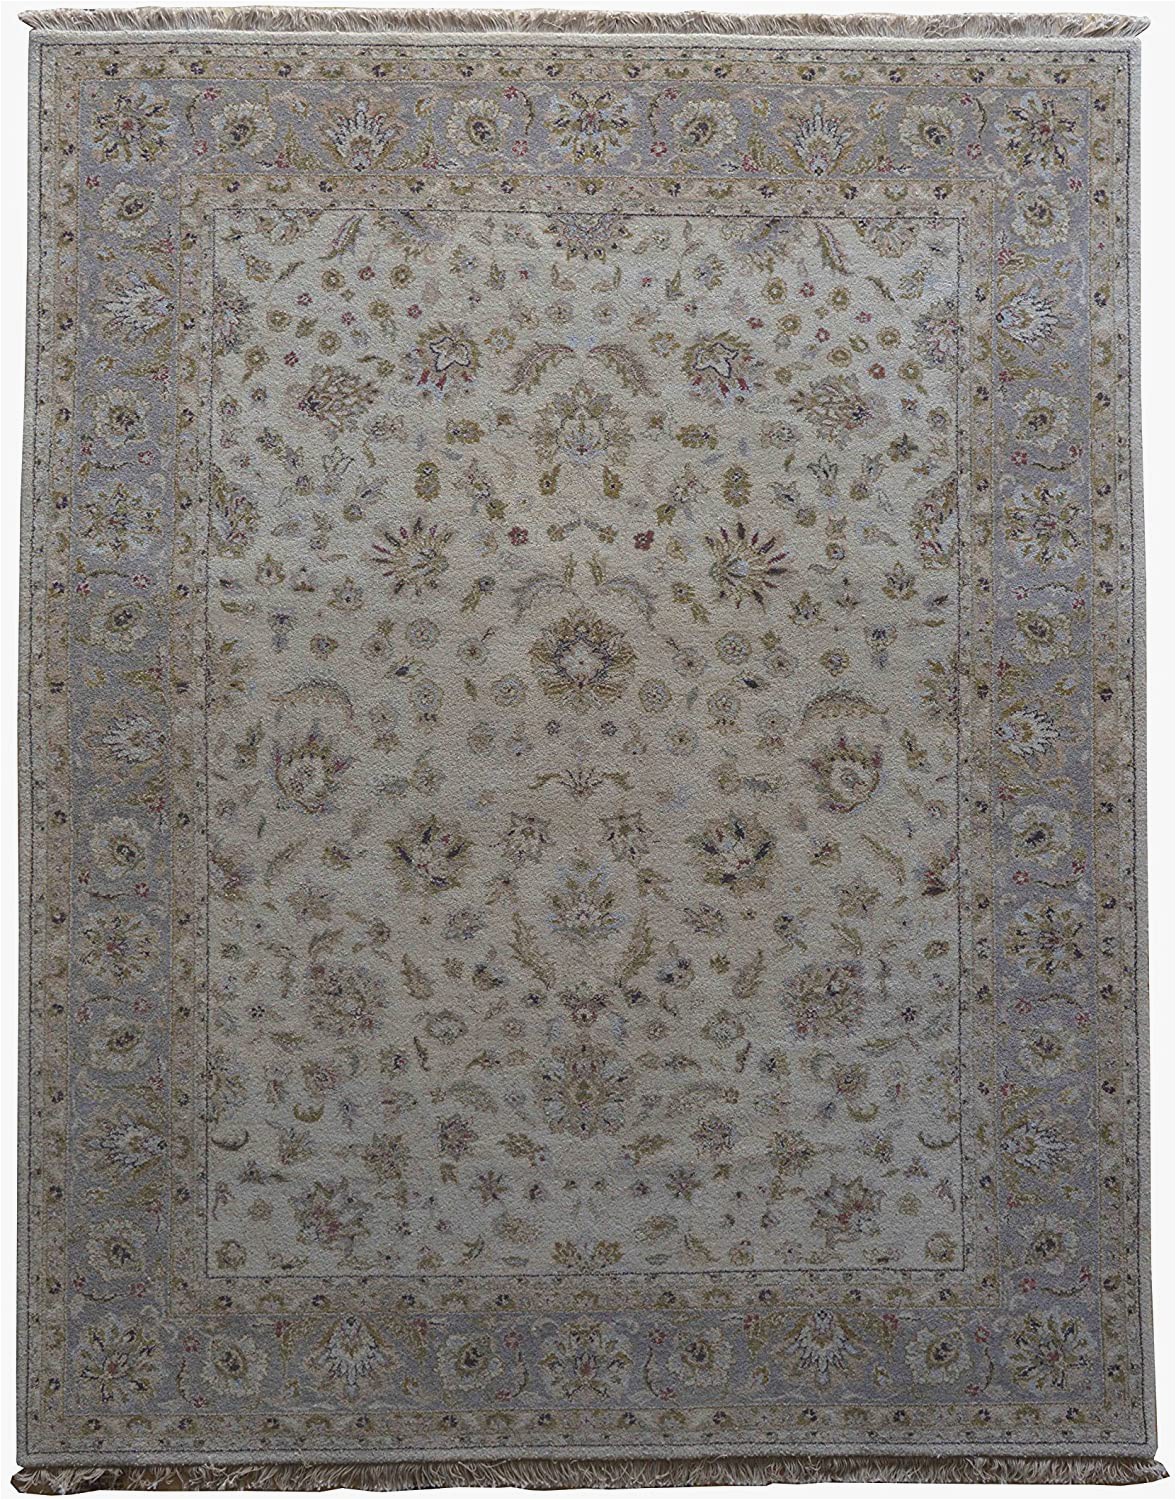 10 Foot Square area Rug Amazon Merorug Beige Color Wool Classic Nepalese Hand